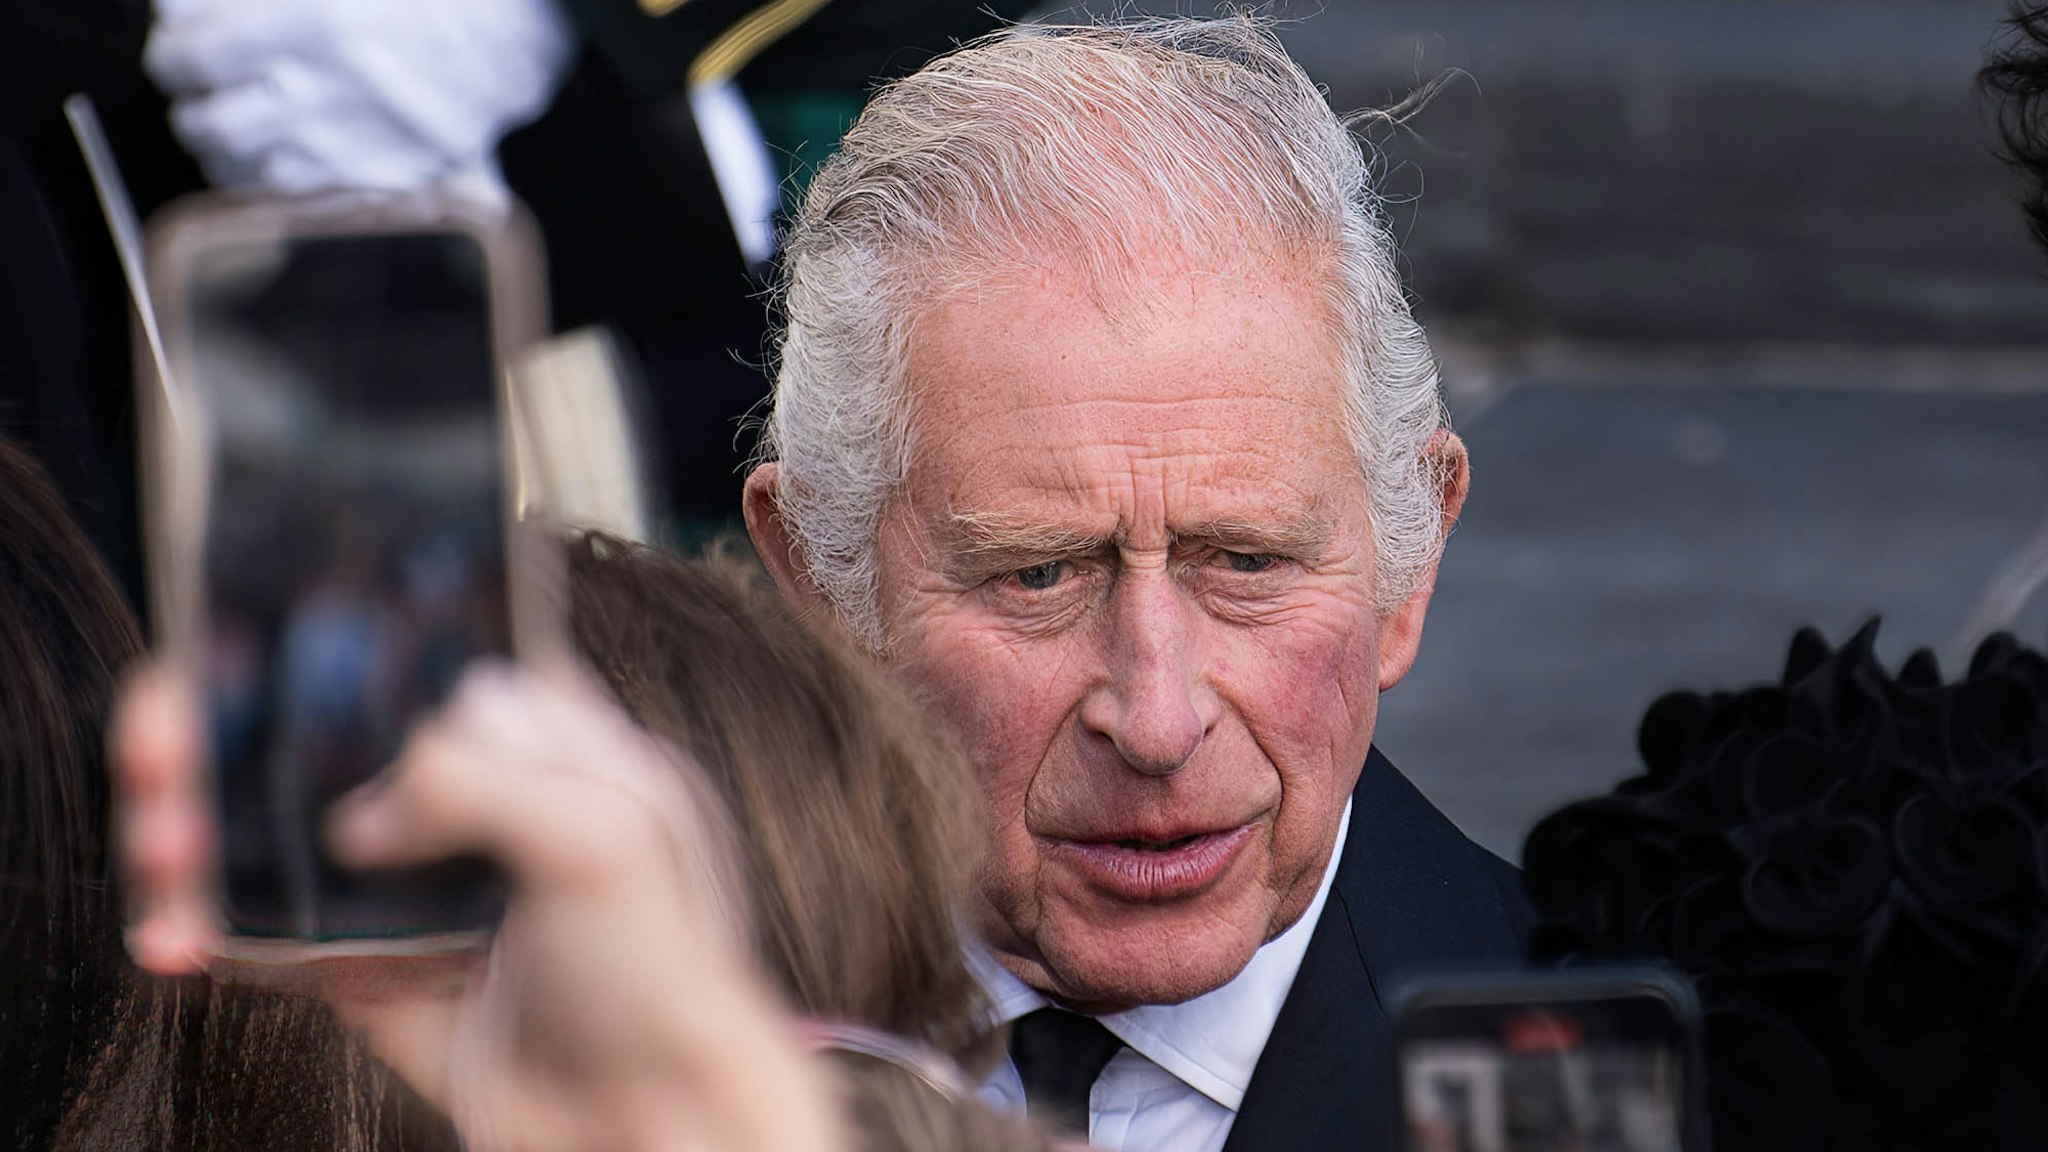 During his first official trip to Wales as the new King of the United Kingdom Charles III appeared human as he approached the cheering crowd to the words "God save the King" outside the Welsh Parliament.